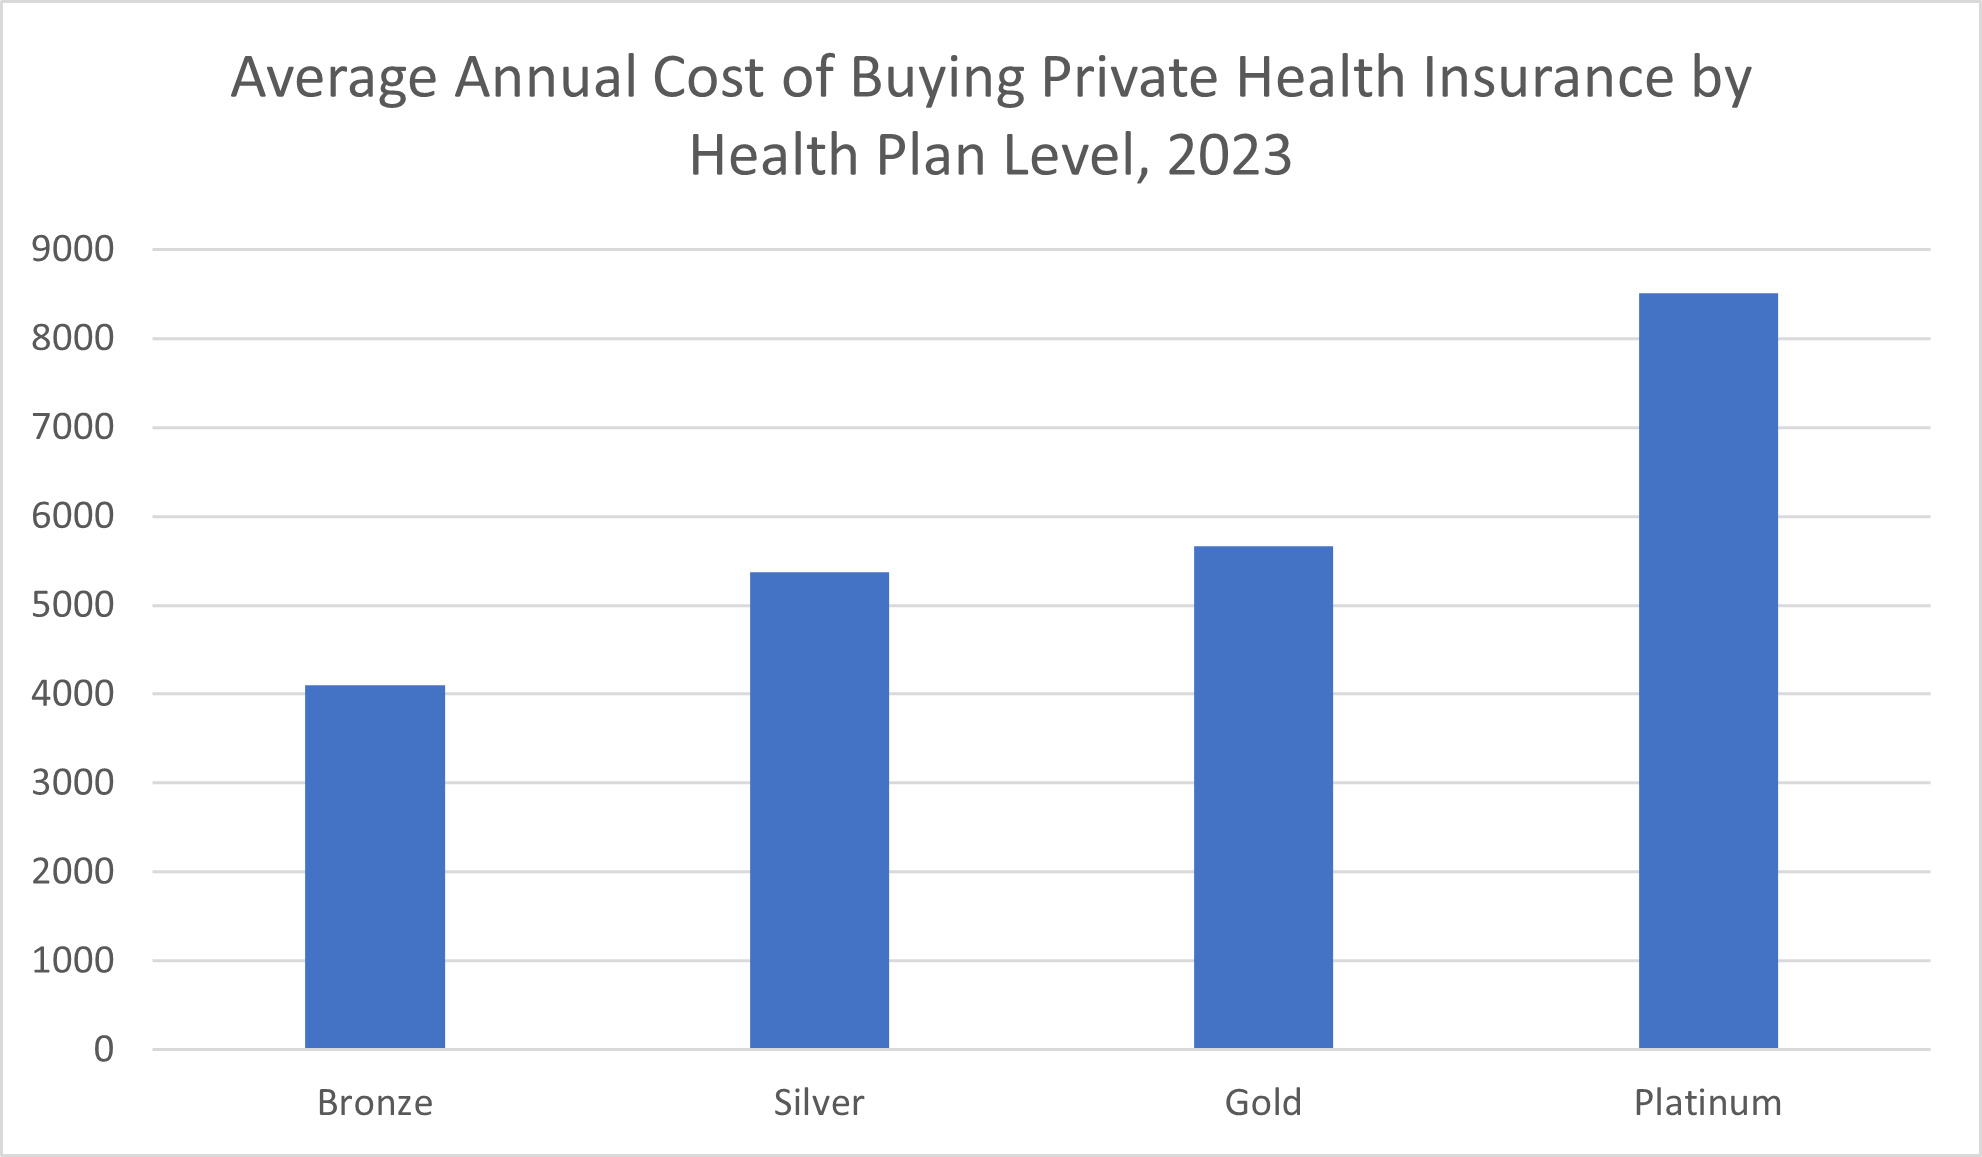 Average annual cost of buying private health insurance by health plan level, 2023 